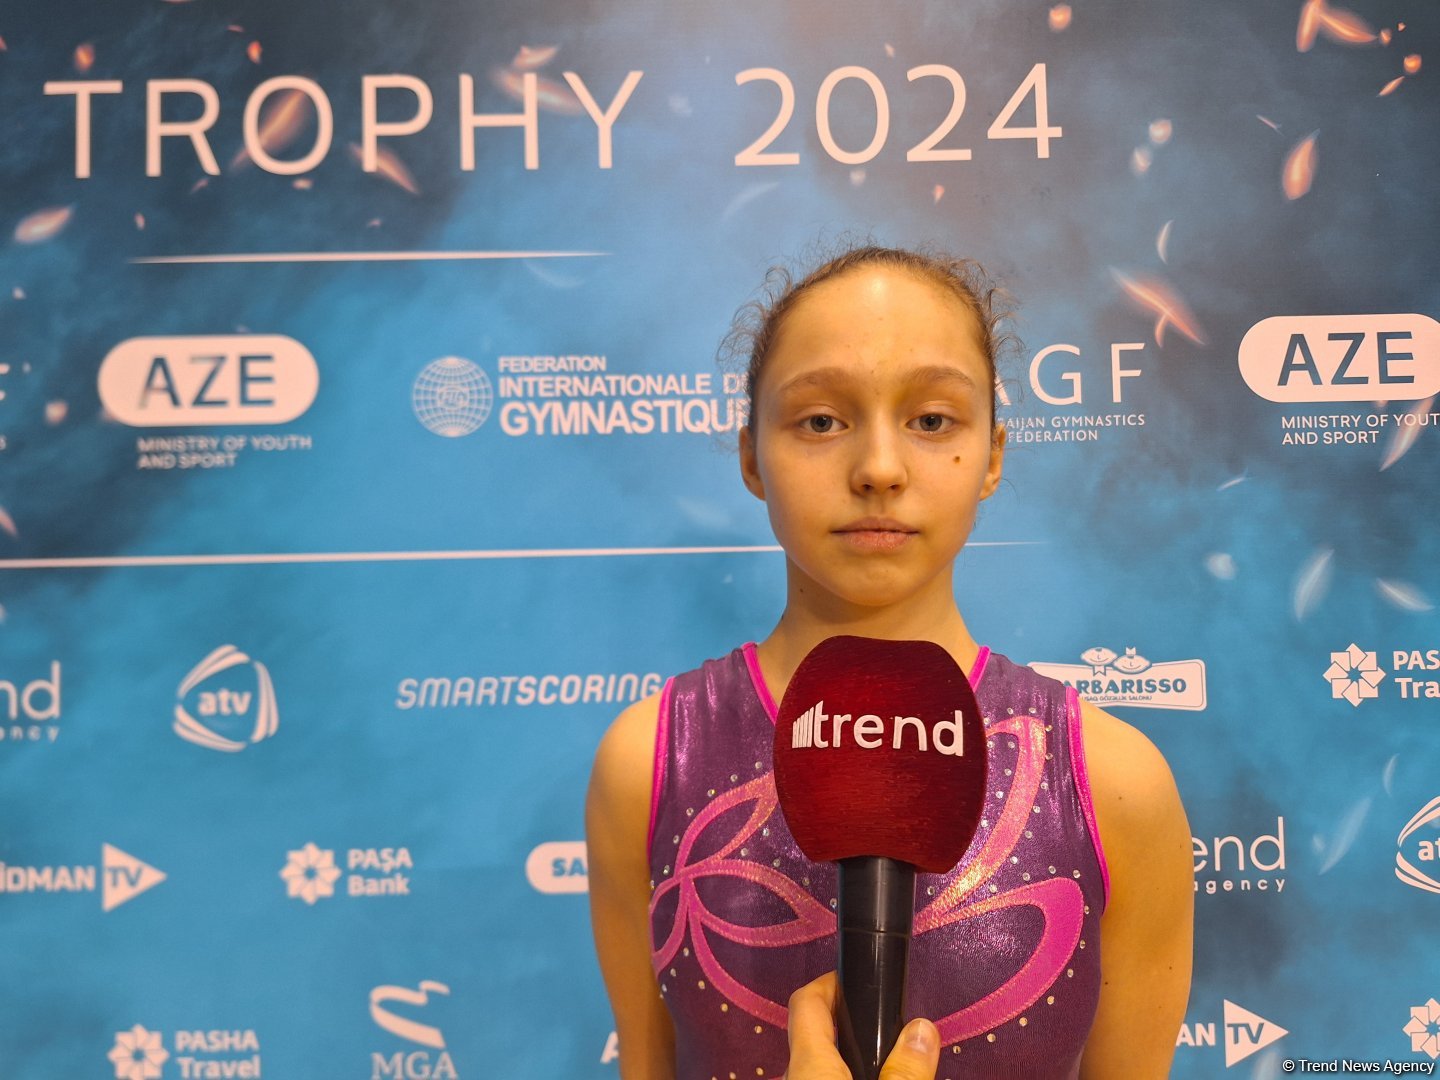 Pleased to come to Baku for AGF Trophy Int'l tournament  - Uzbek athlete